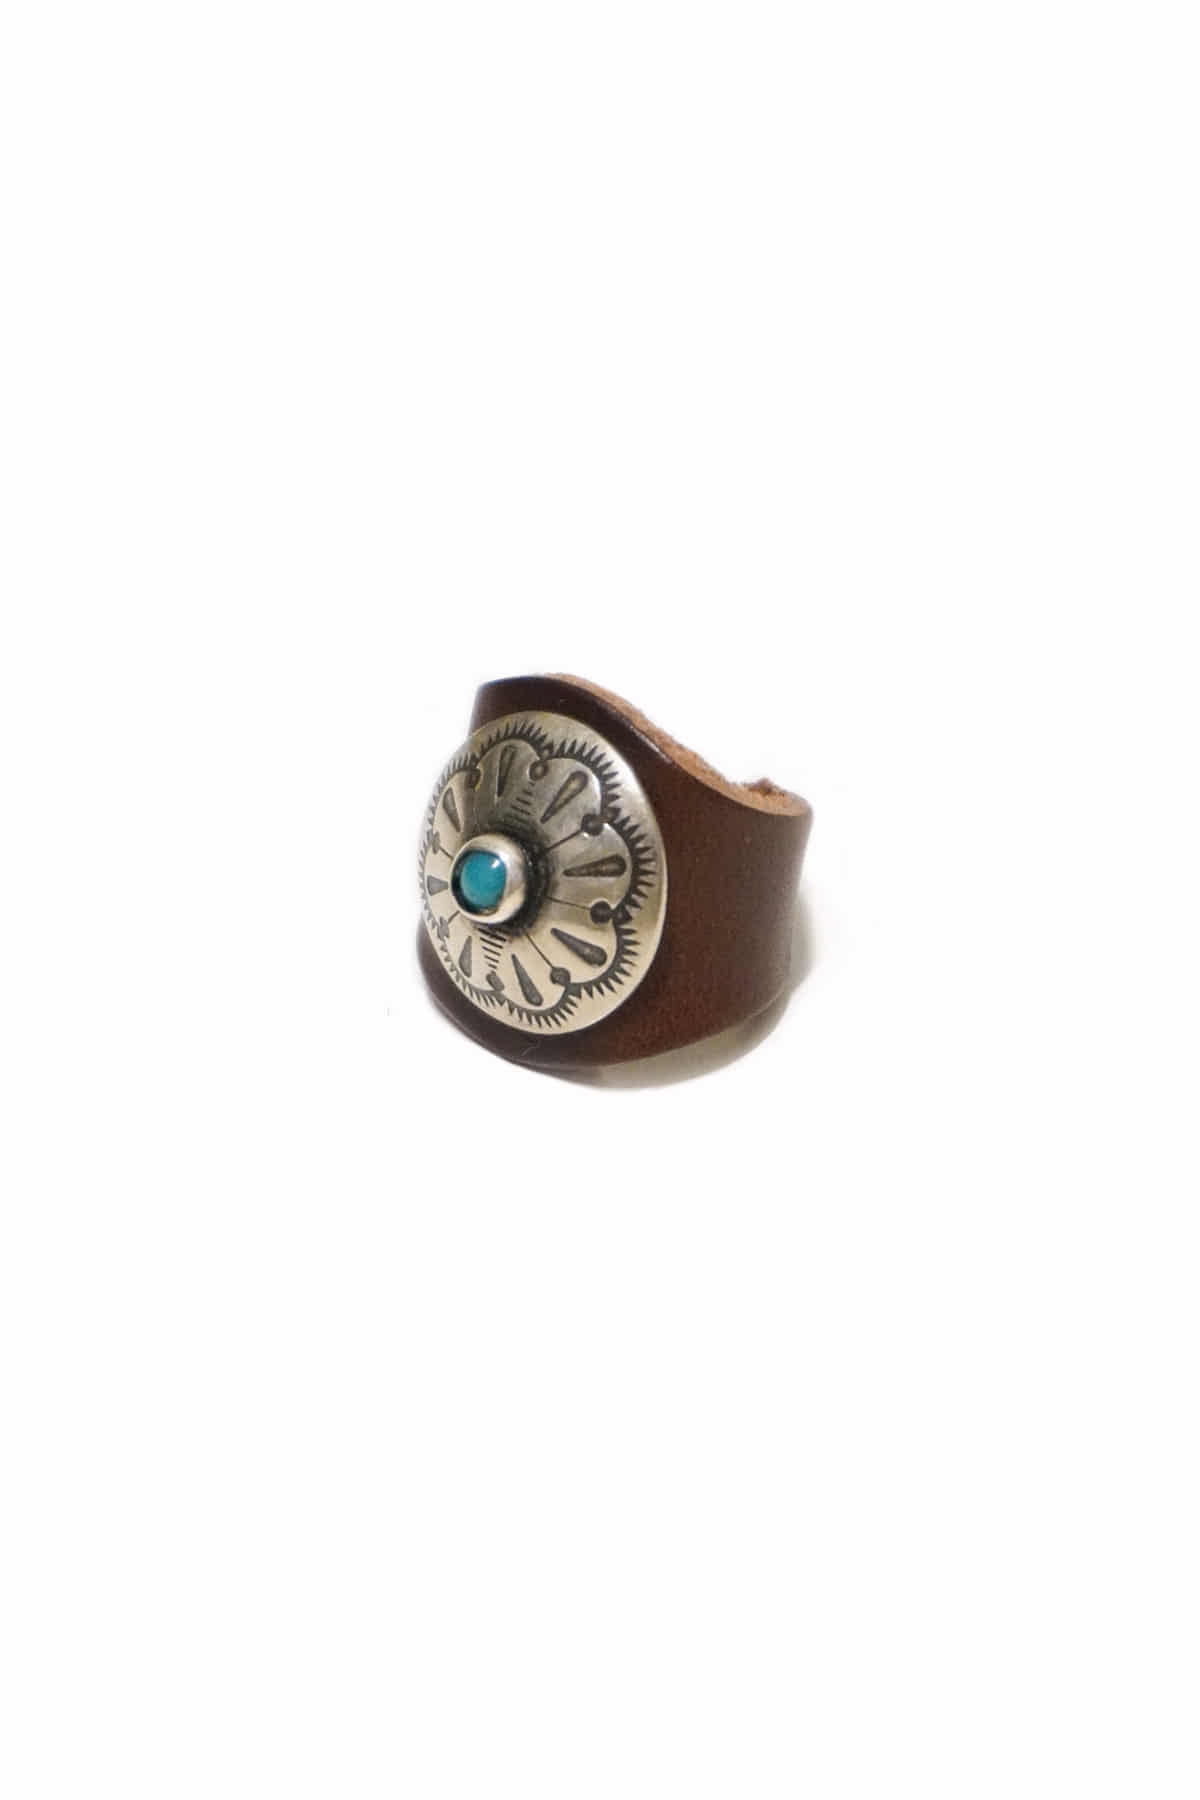 Restock! [YUKETEN] Leather Ring with Concho - Brown